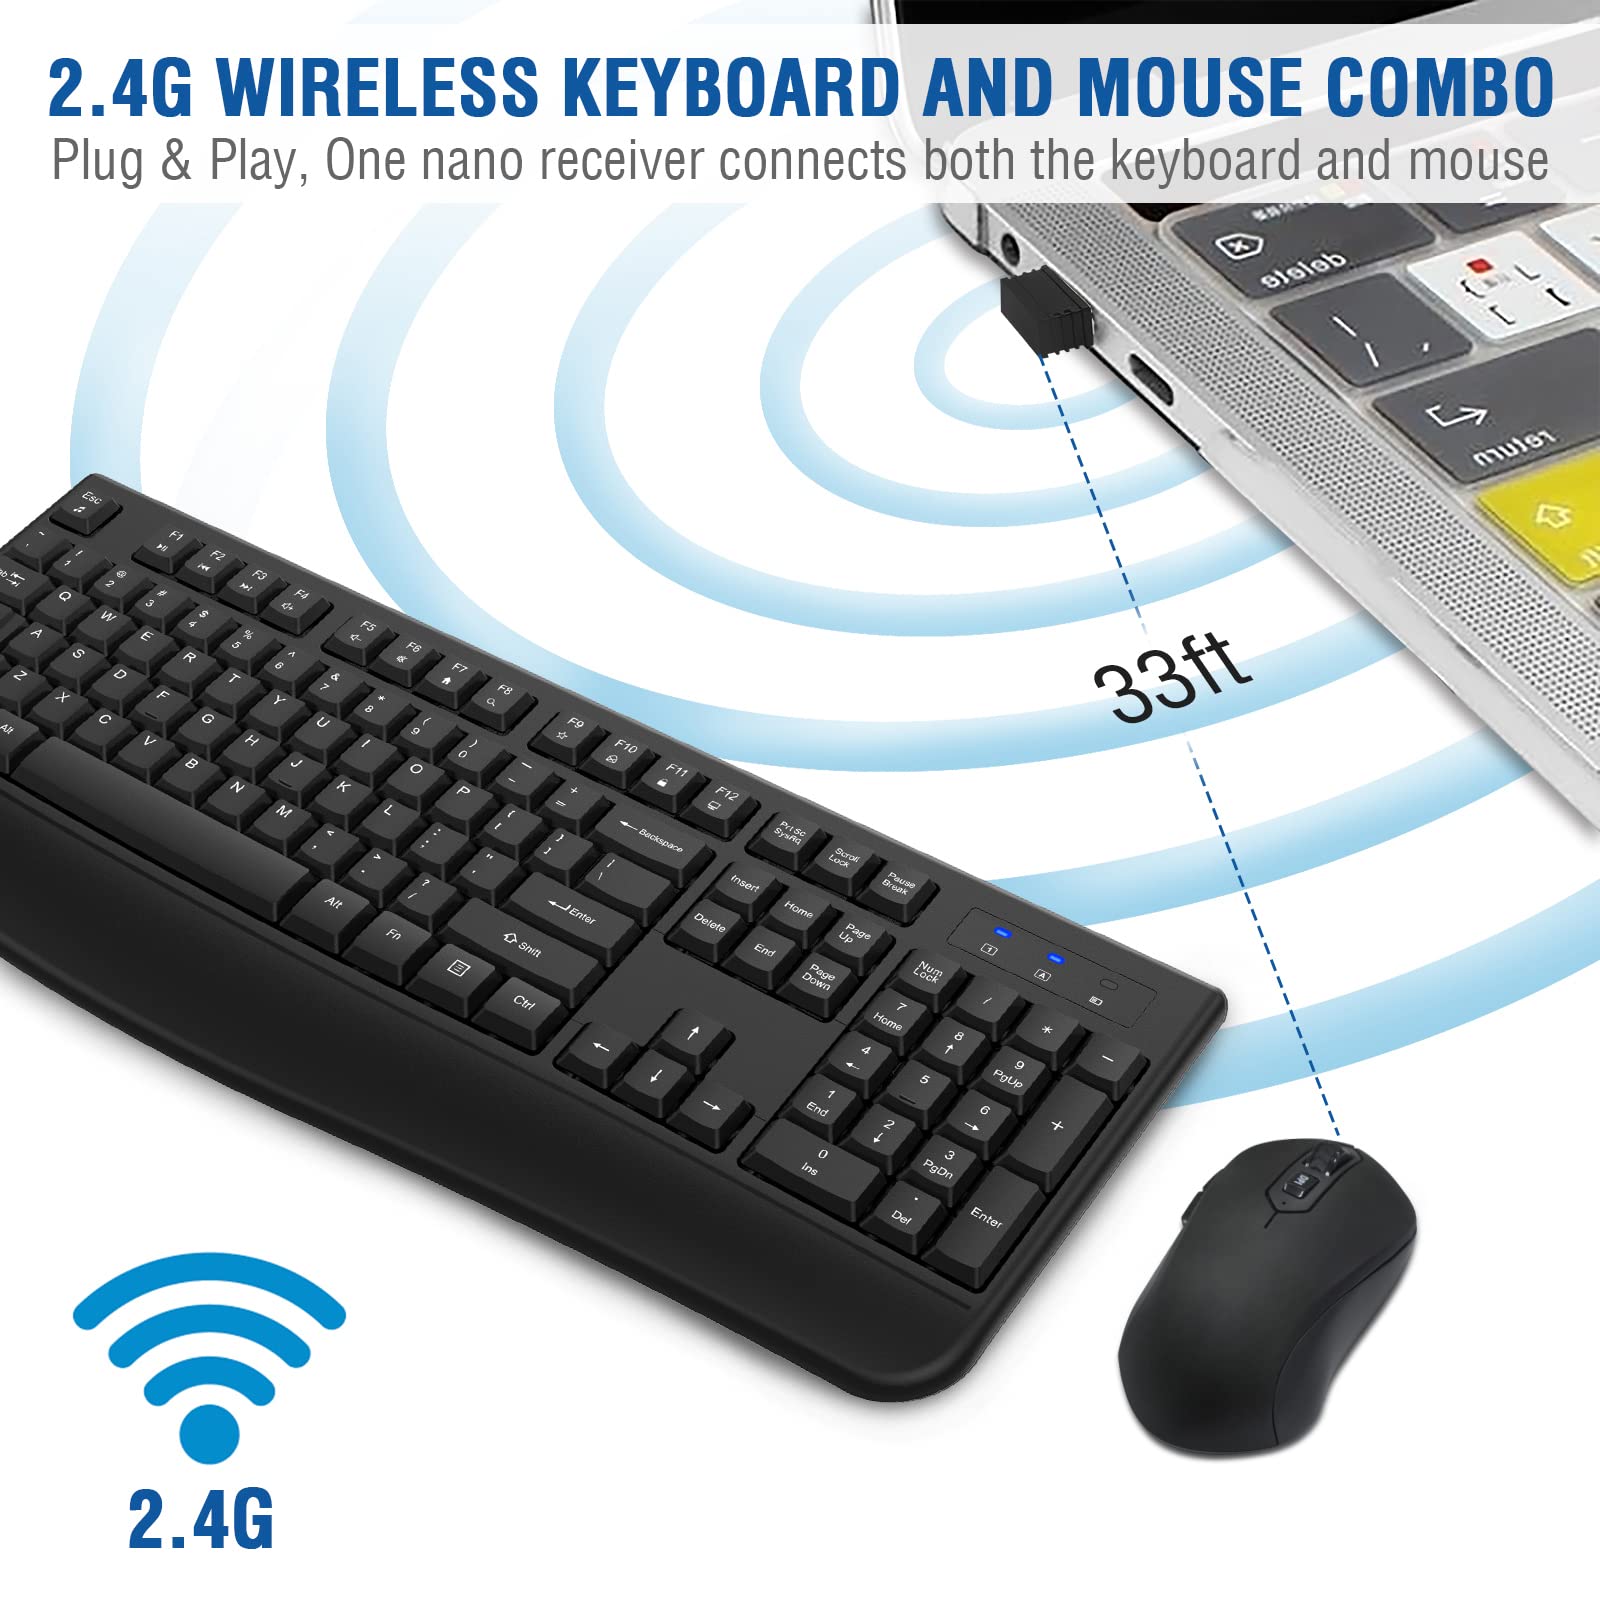 Wireless Keyboard and Mouse Combo, EDJO 2.4G Full-Sized Ergonomic Computer Keyboard with Wrist Rest and 3 Level DPI Adjustable Wireless Mouse for Windows, Mac OS Desktop/Laptop/PC